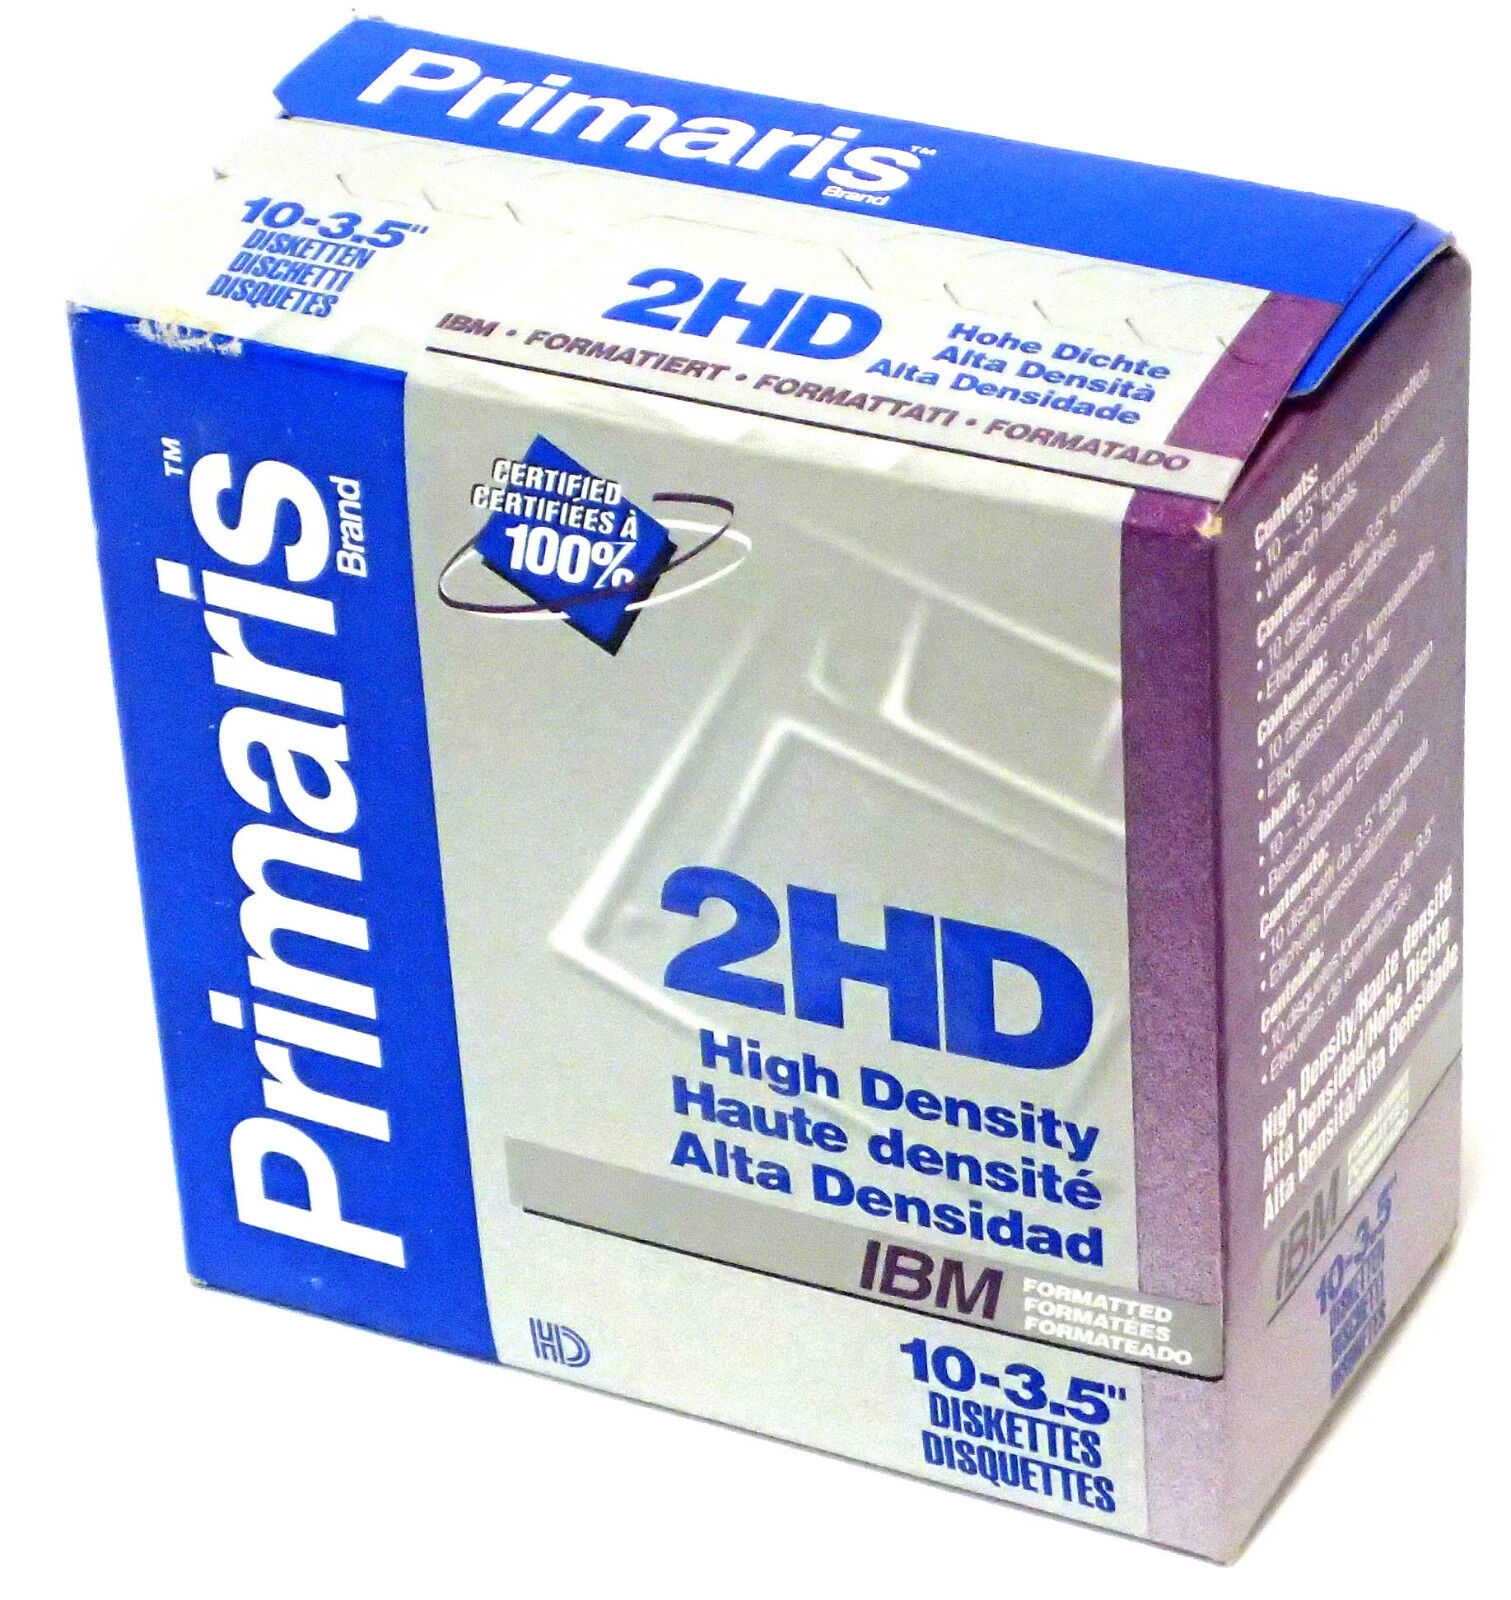 PRIMARIS 2HD IBM FORMATTED 3.5" FLOPPY DISKS / HIGH DENSITY DISQUETTES, 10PC NEW